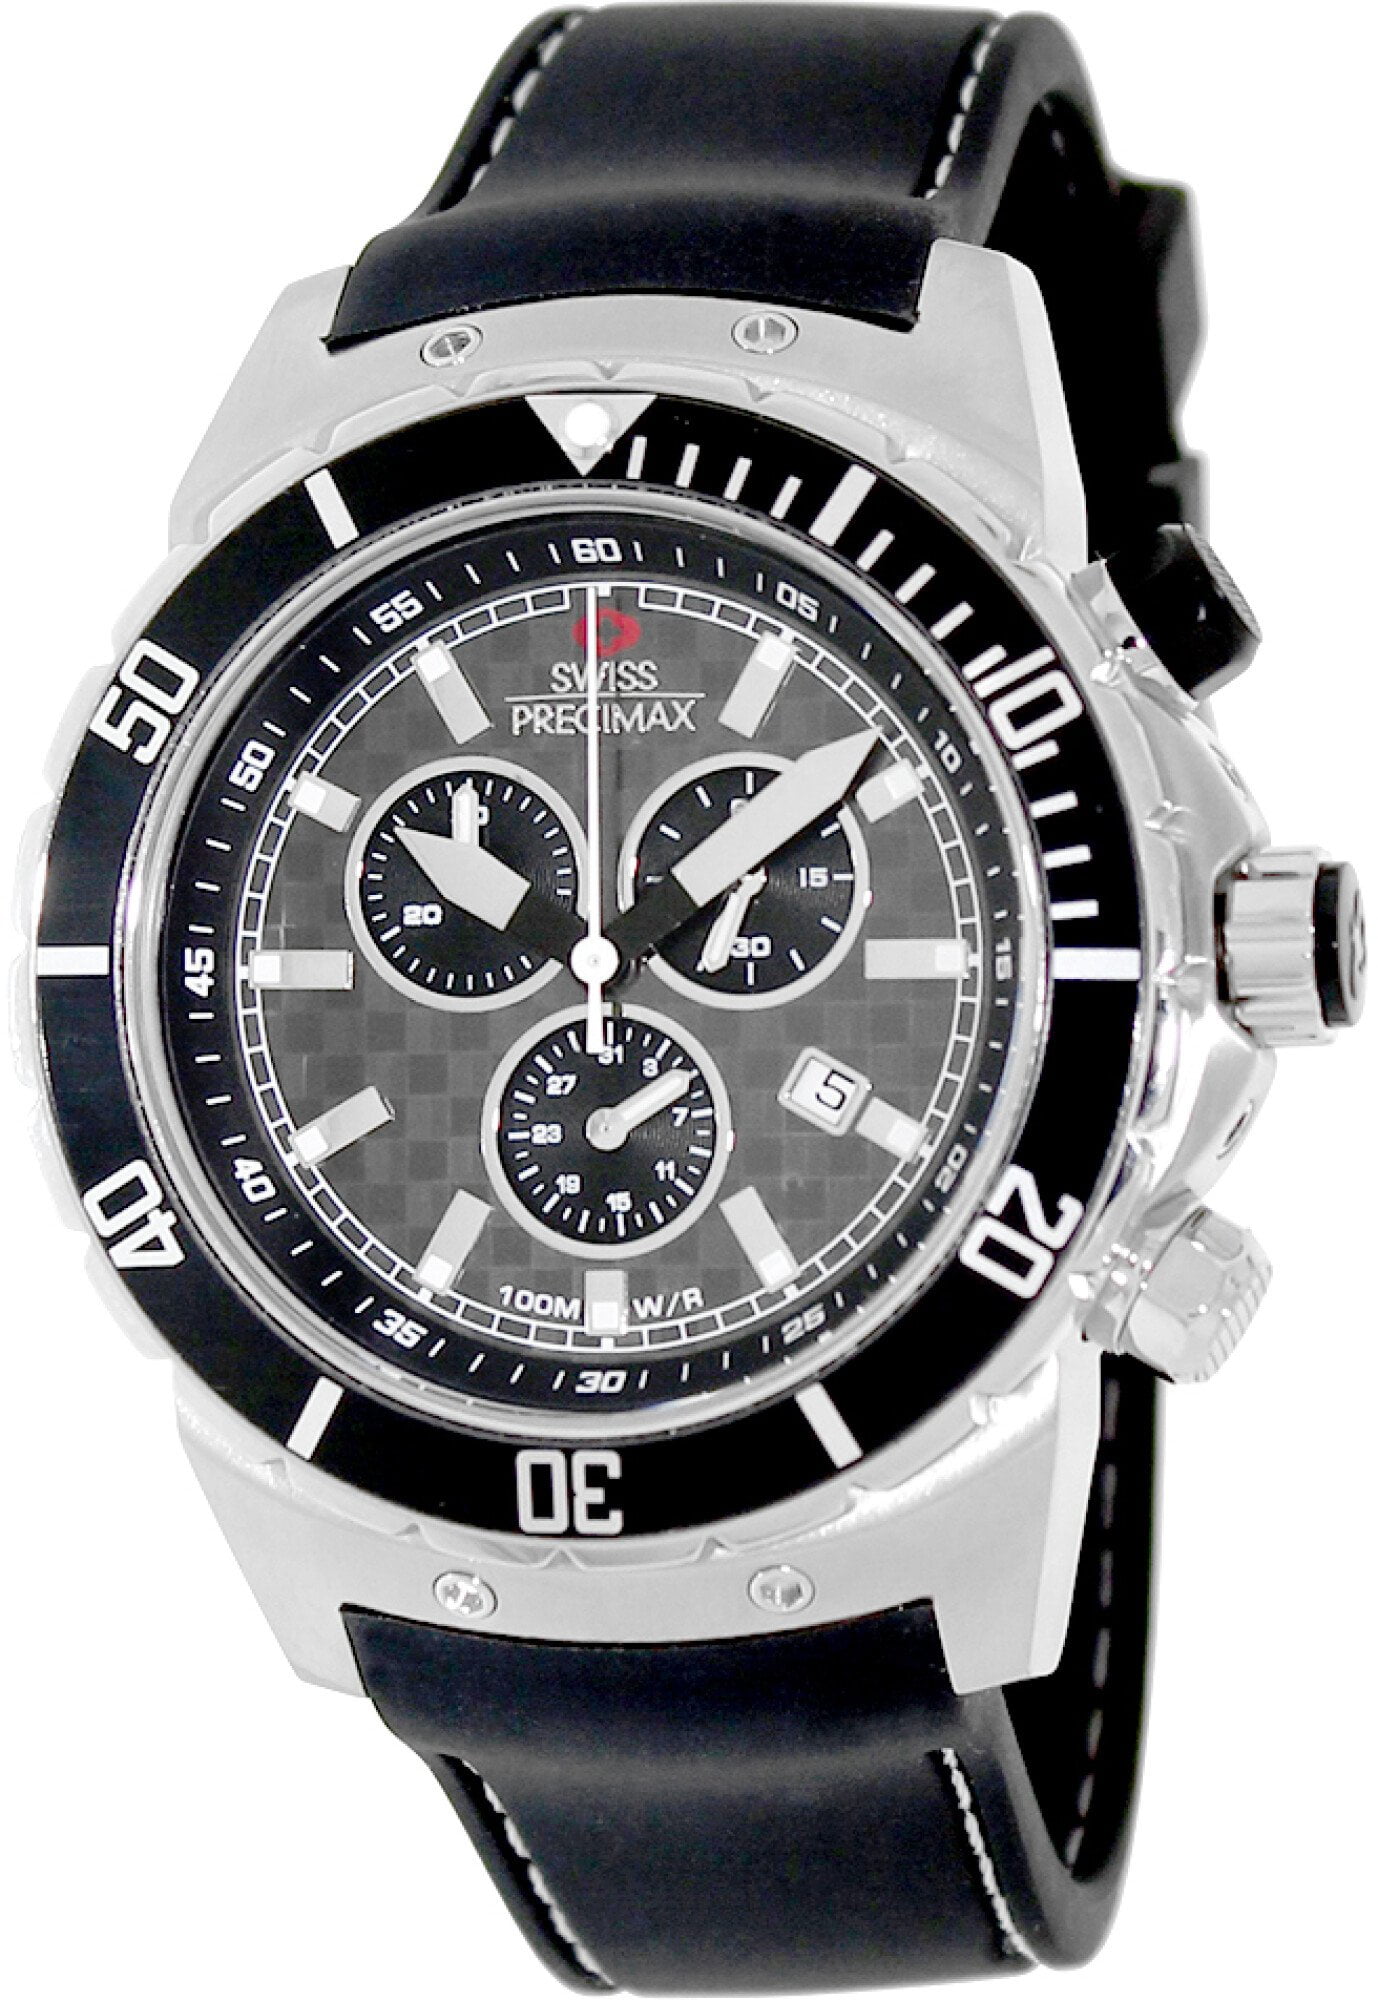 Precimax Chronograph Watch Outlet Store, UP TO 66% OFF 